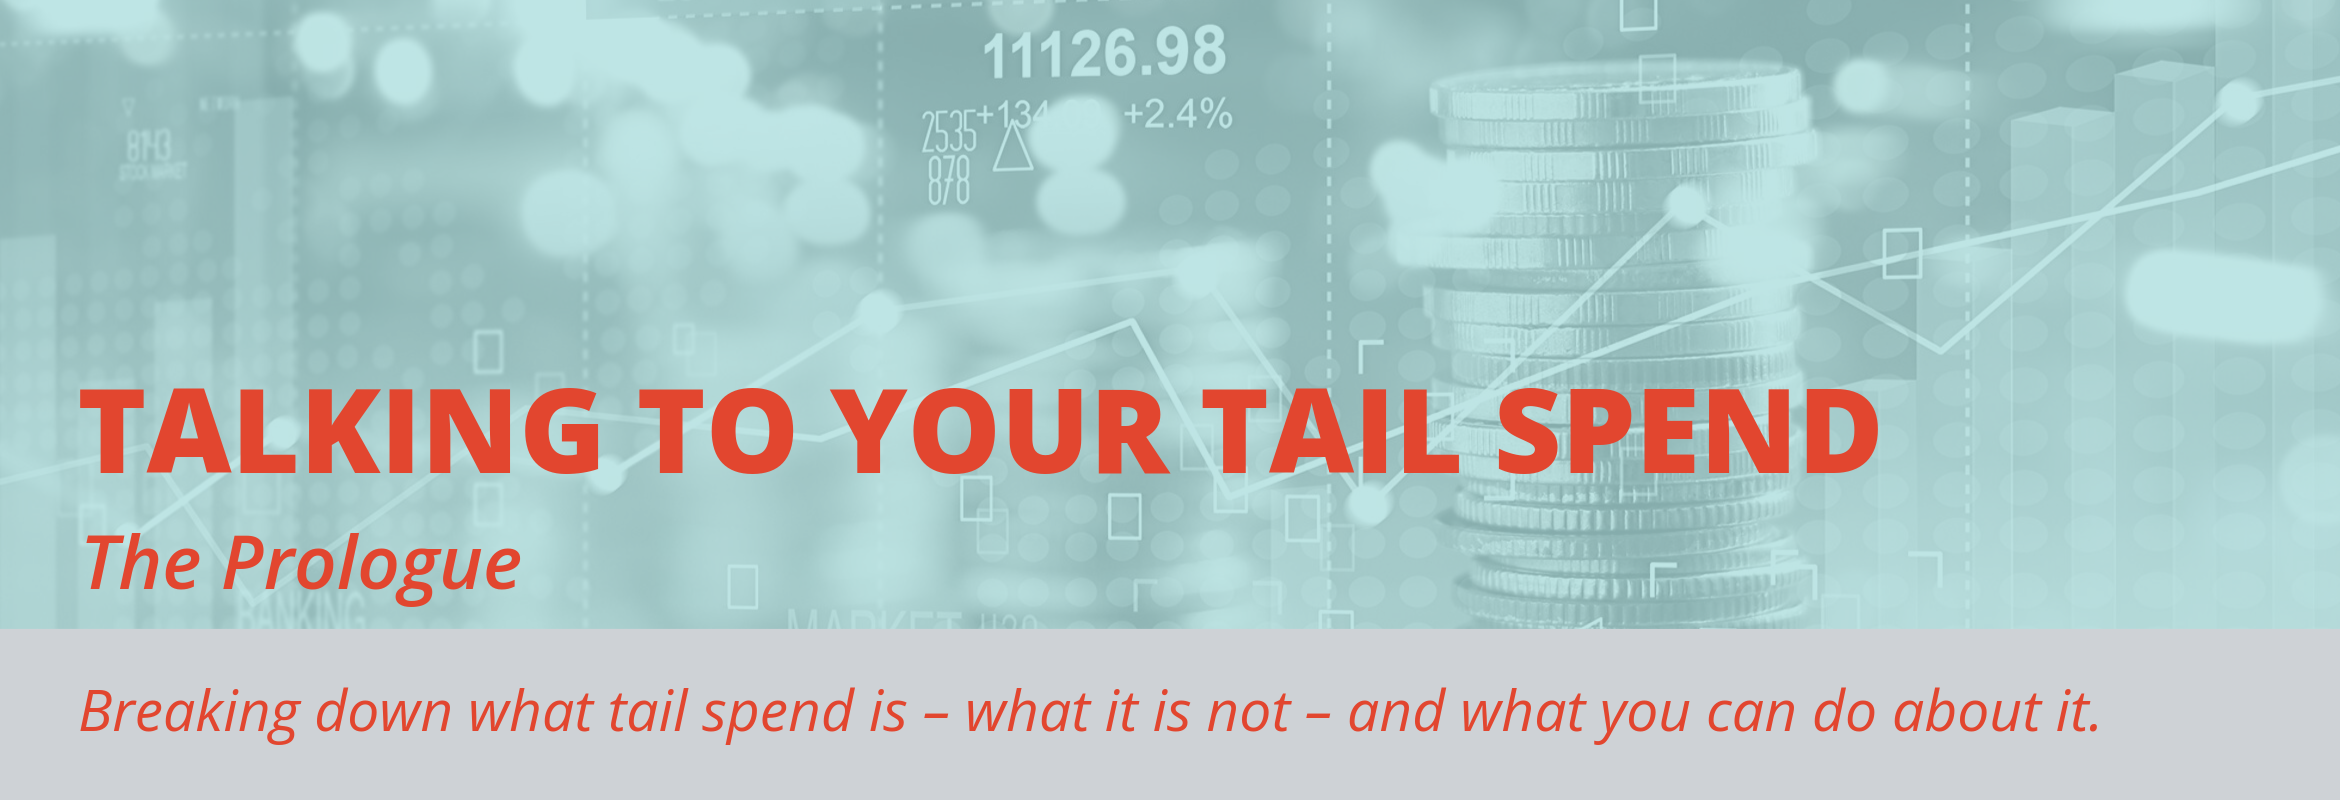 Talking to Your Tail Spend: The Prologue